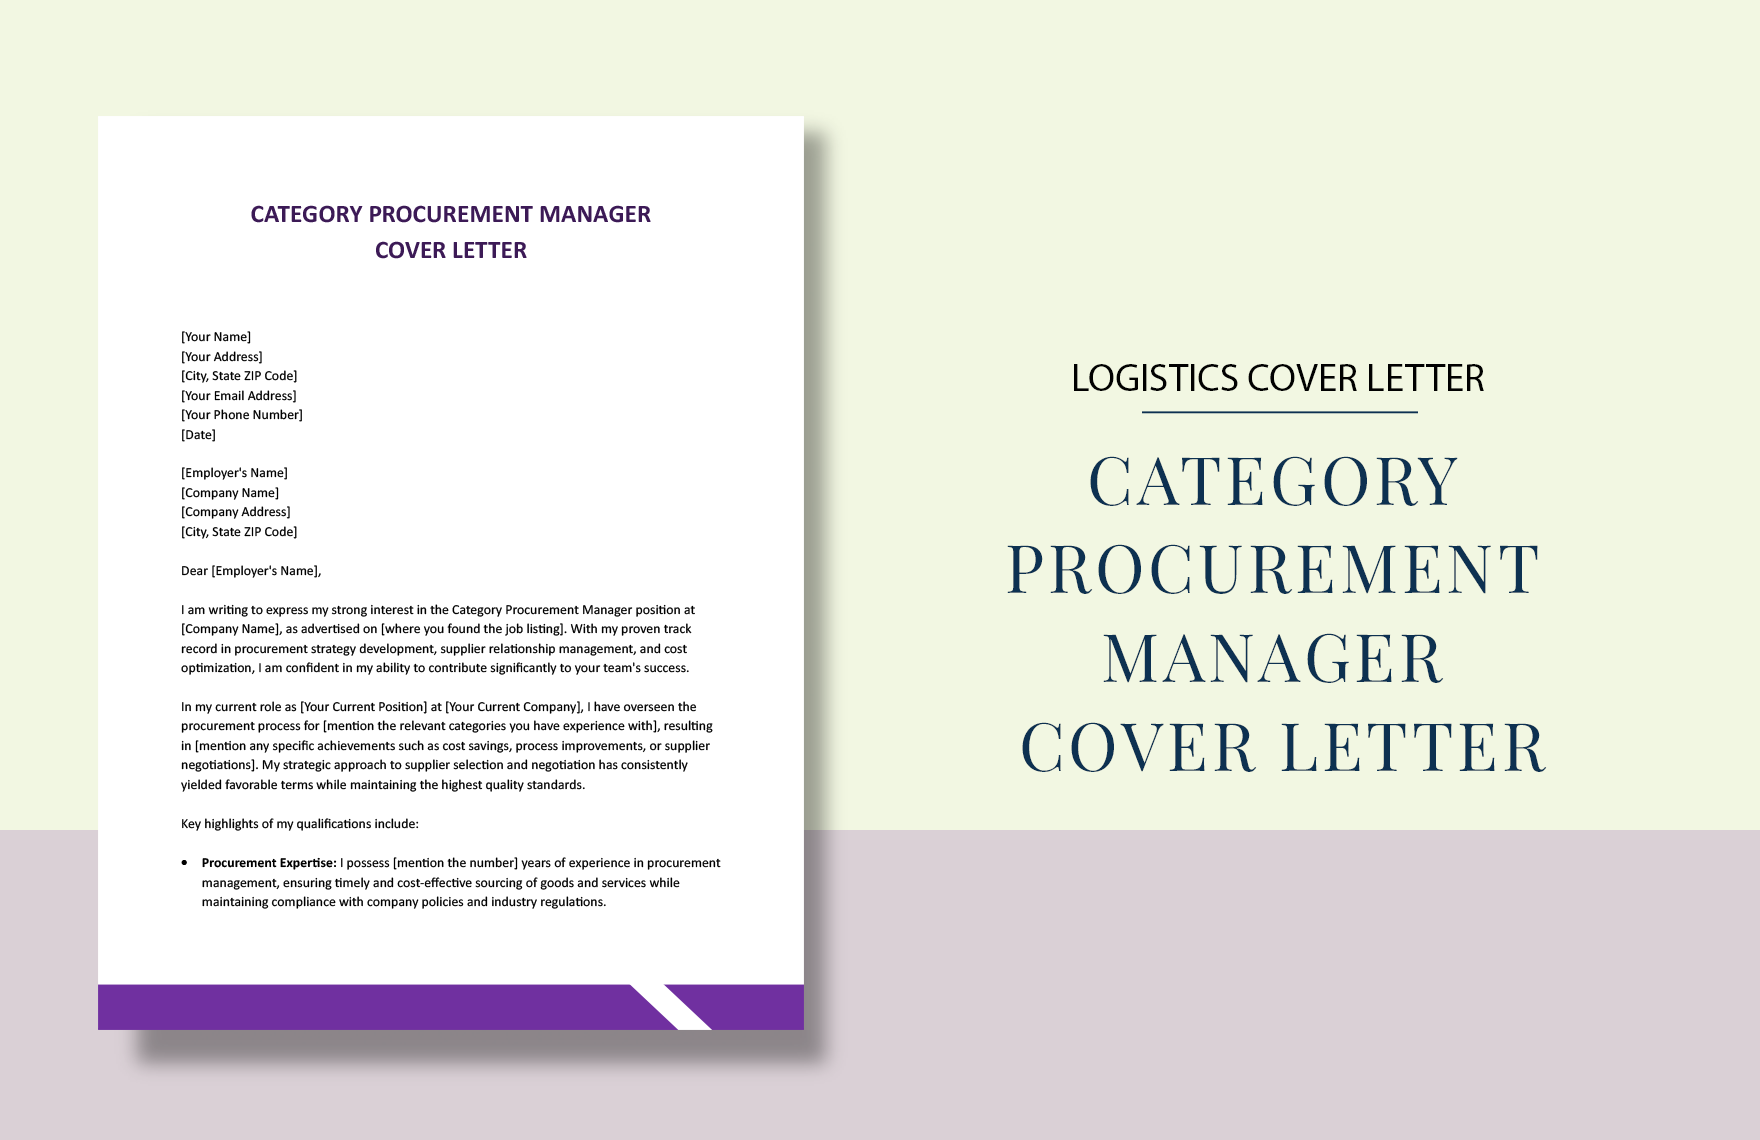 Category Procurement Manager Cover Letter